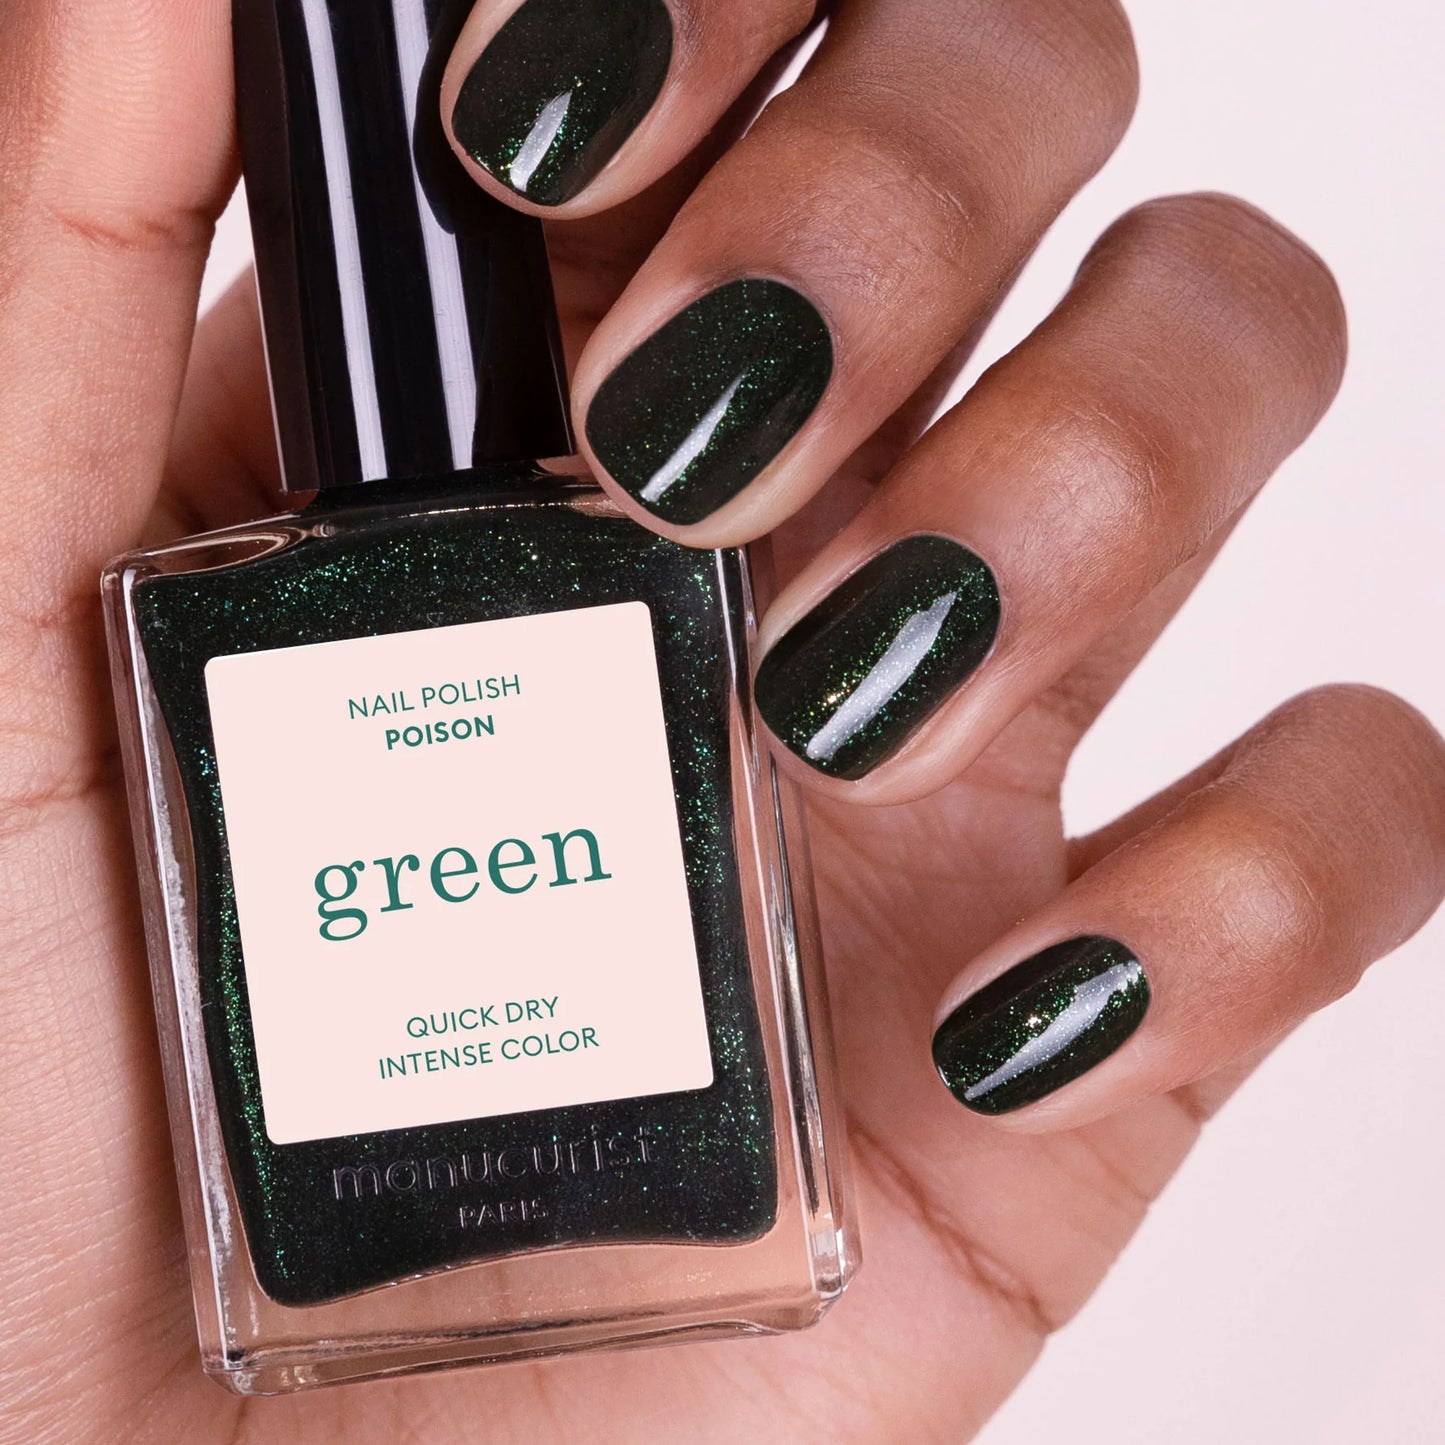 Vernis à ongles green - Poison